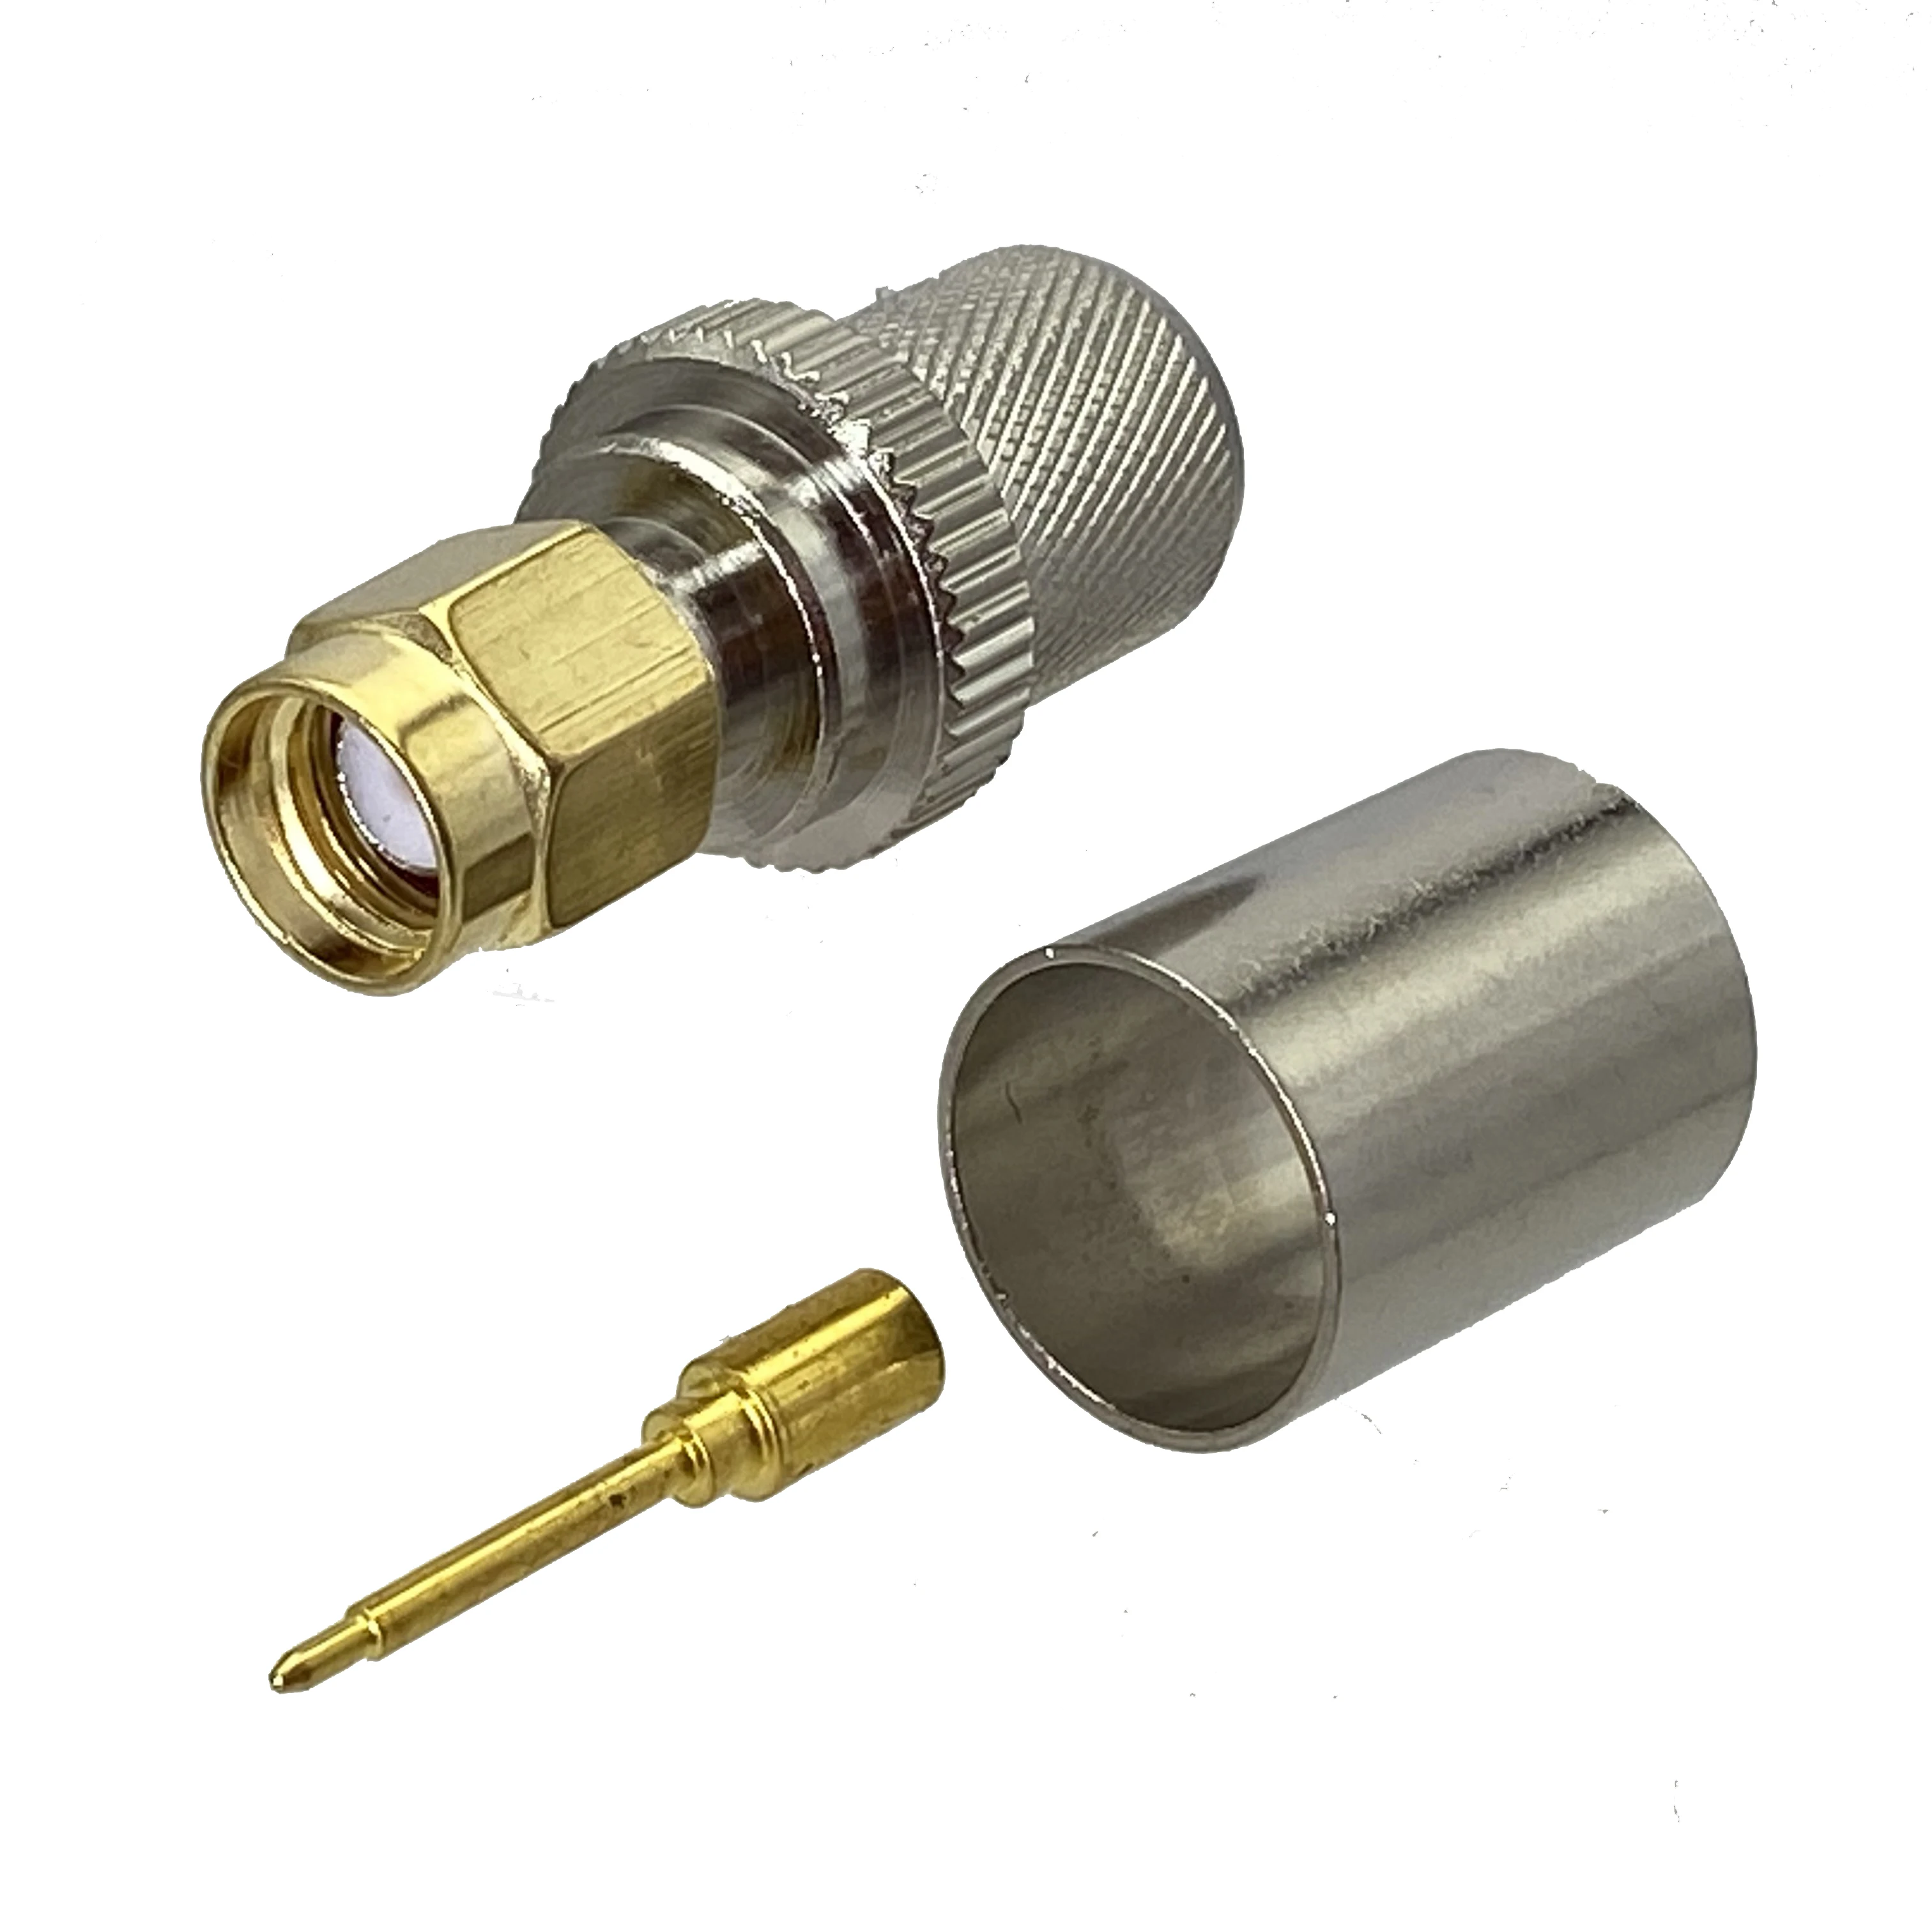 10pcs-connector-sma-plug-male-crimp-for-rg8-lmr400-rg213-cable-gold-plated-straight-rf-coaxial-adapter-new